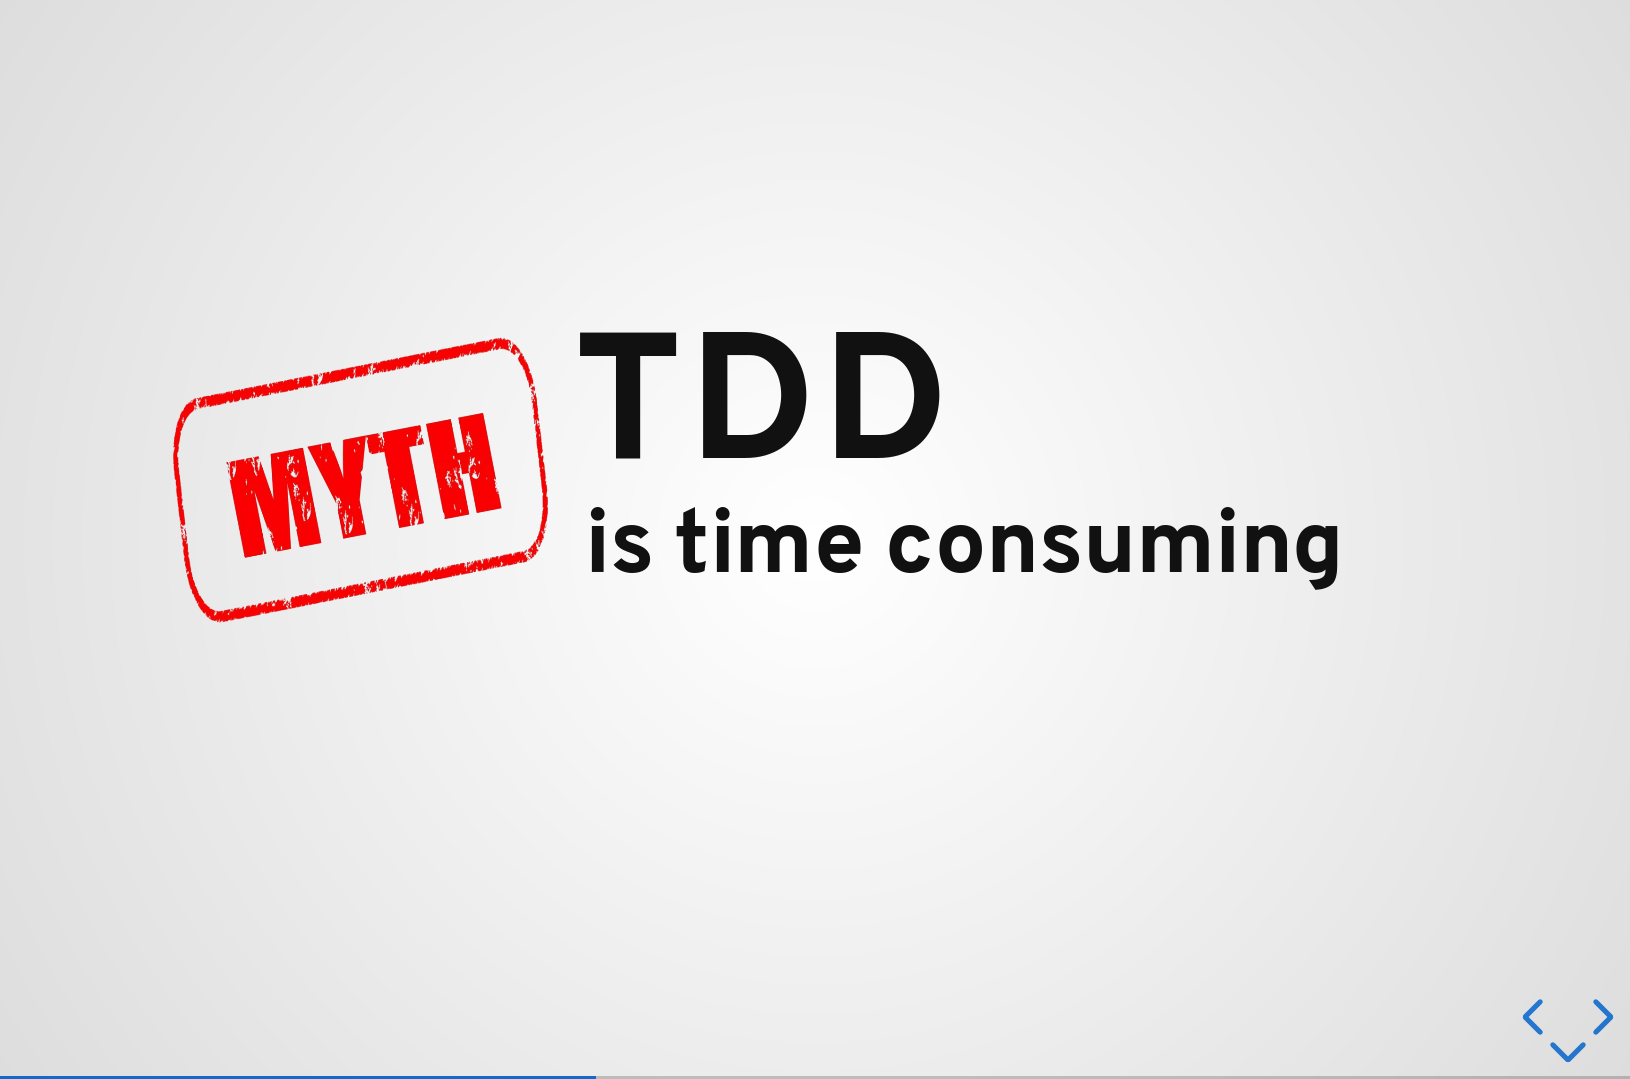 Myth #1: TDD is time consuming